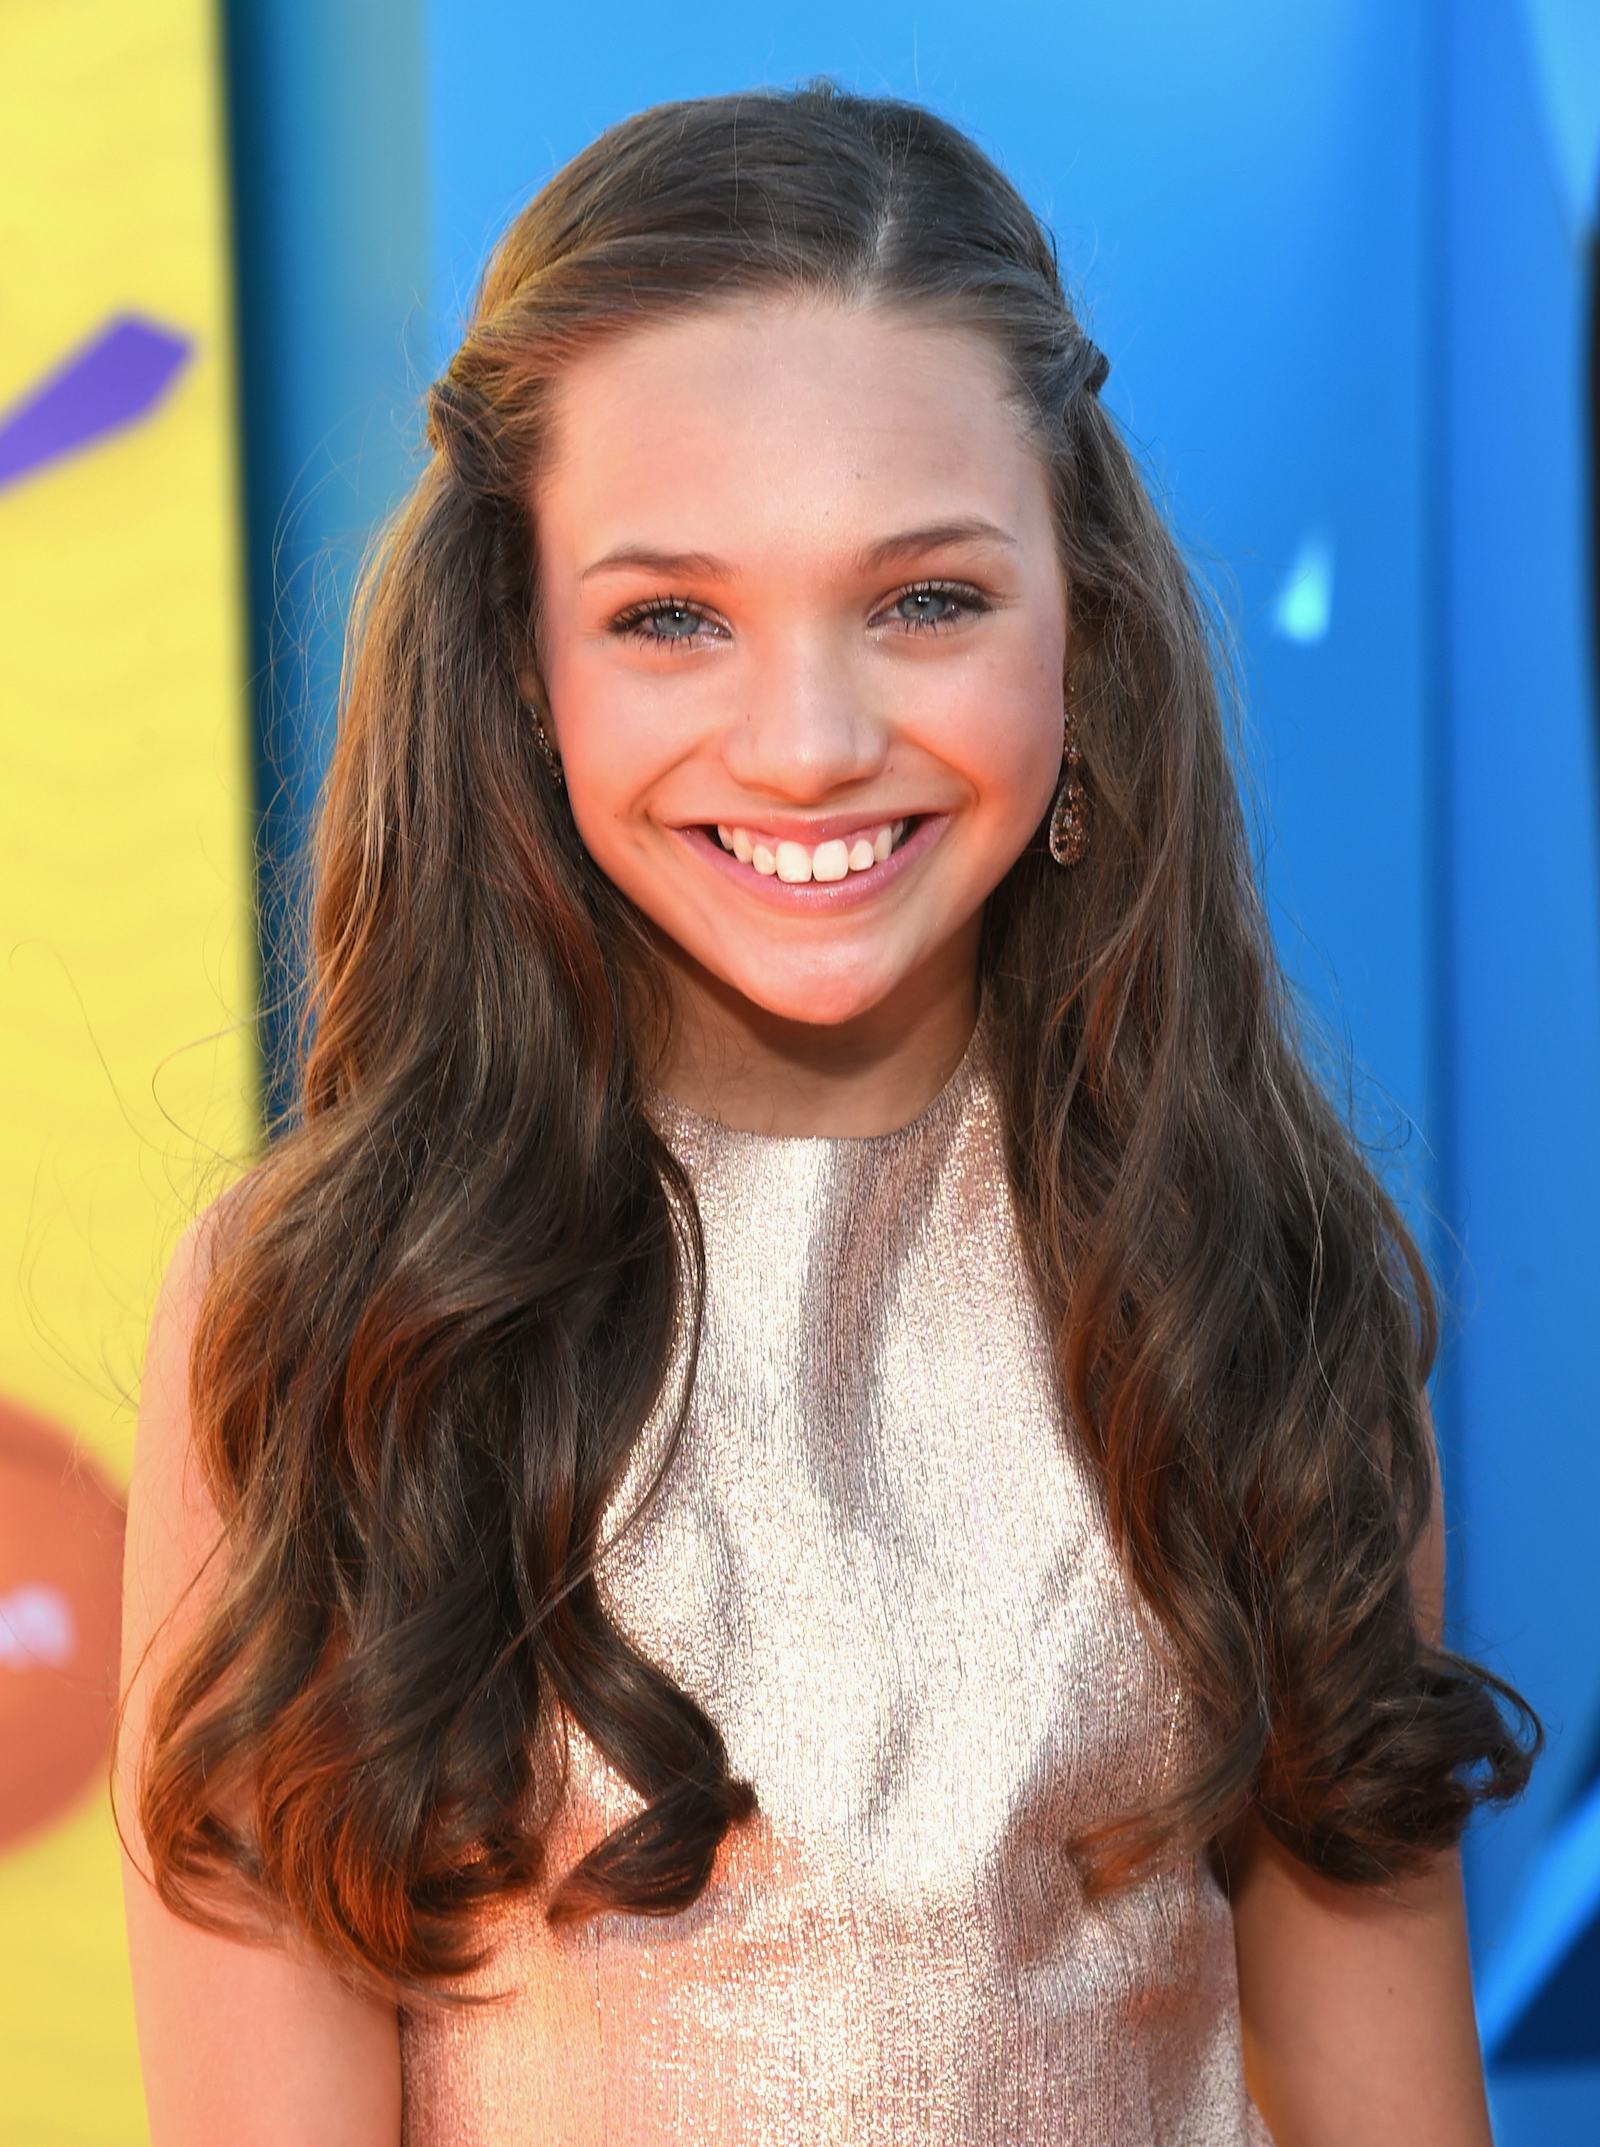 Will Maddie Be On 'Dance Moms' Season 6? The Dancer Might Take Her